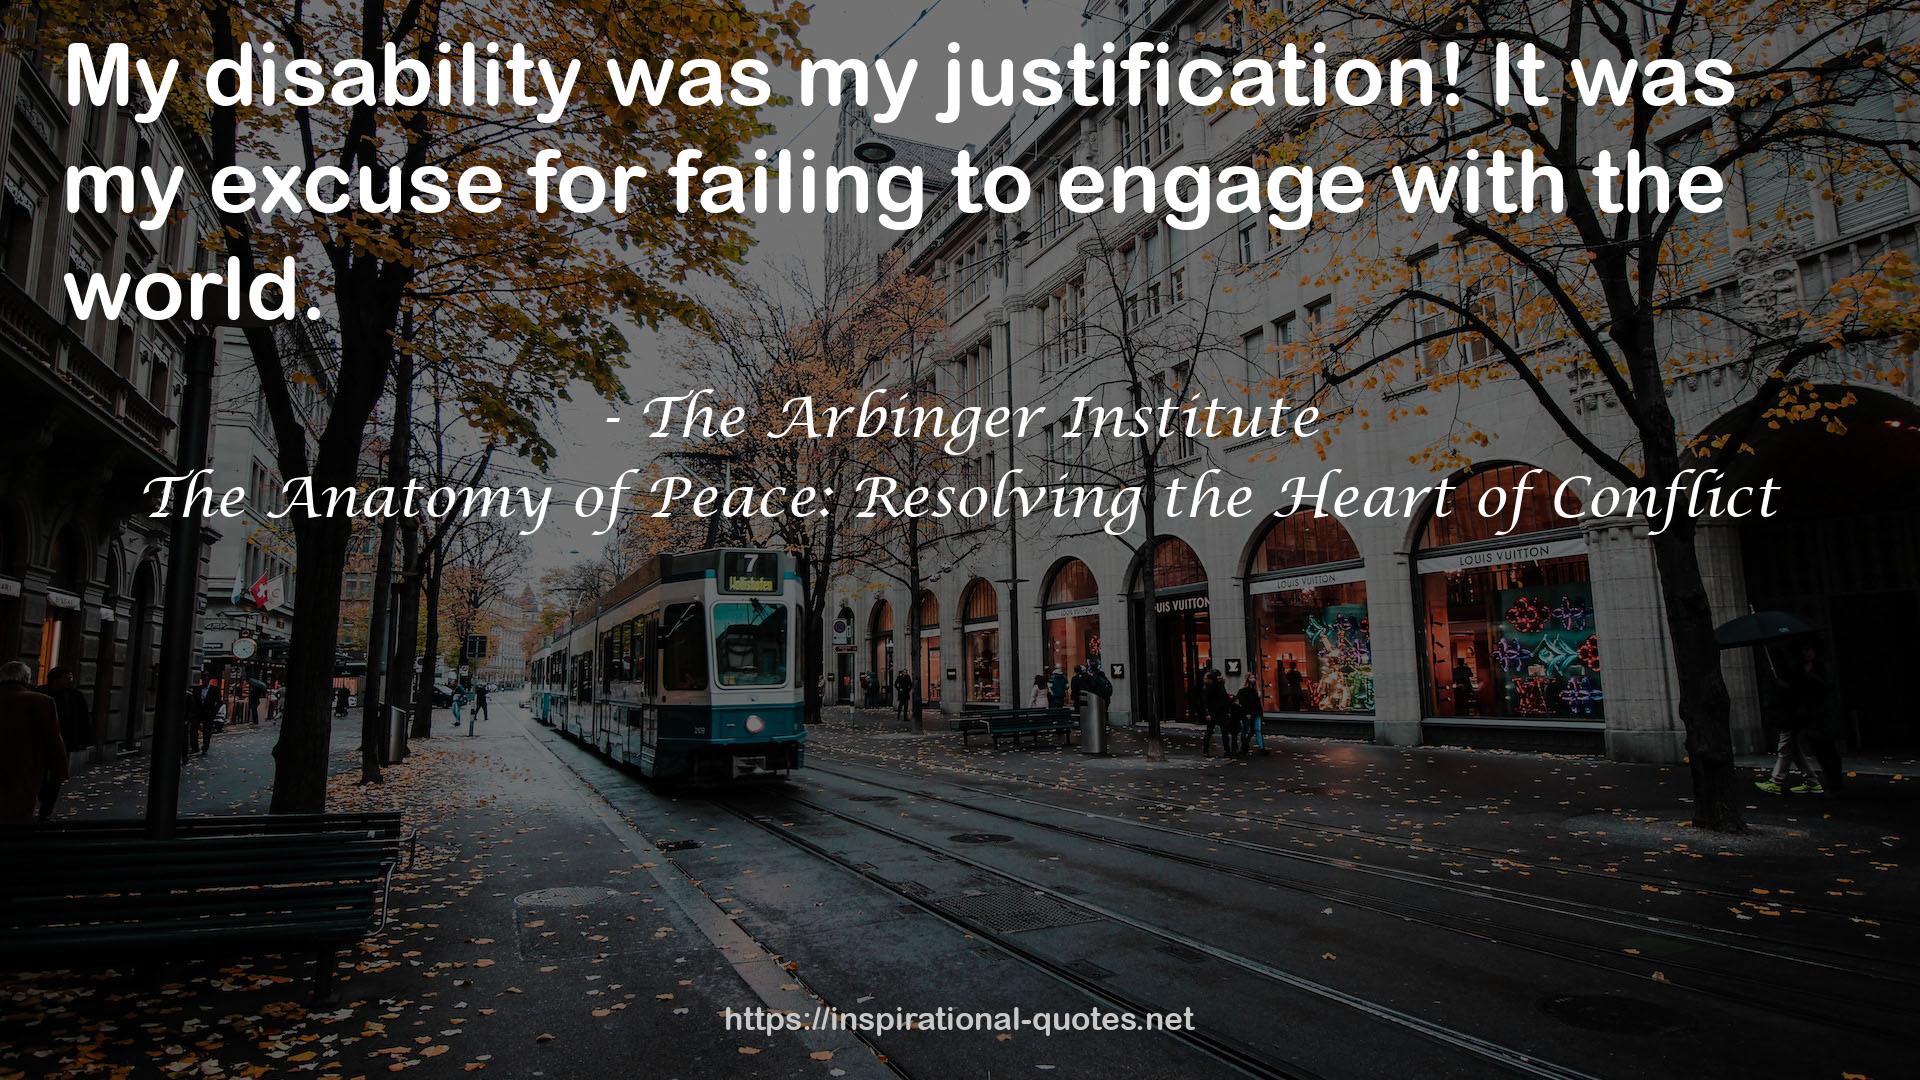 The Anatomy of Peace: Resolving the Heart of Conflict QUOTES